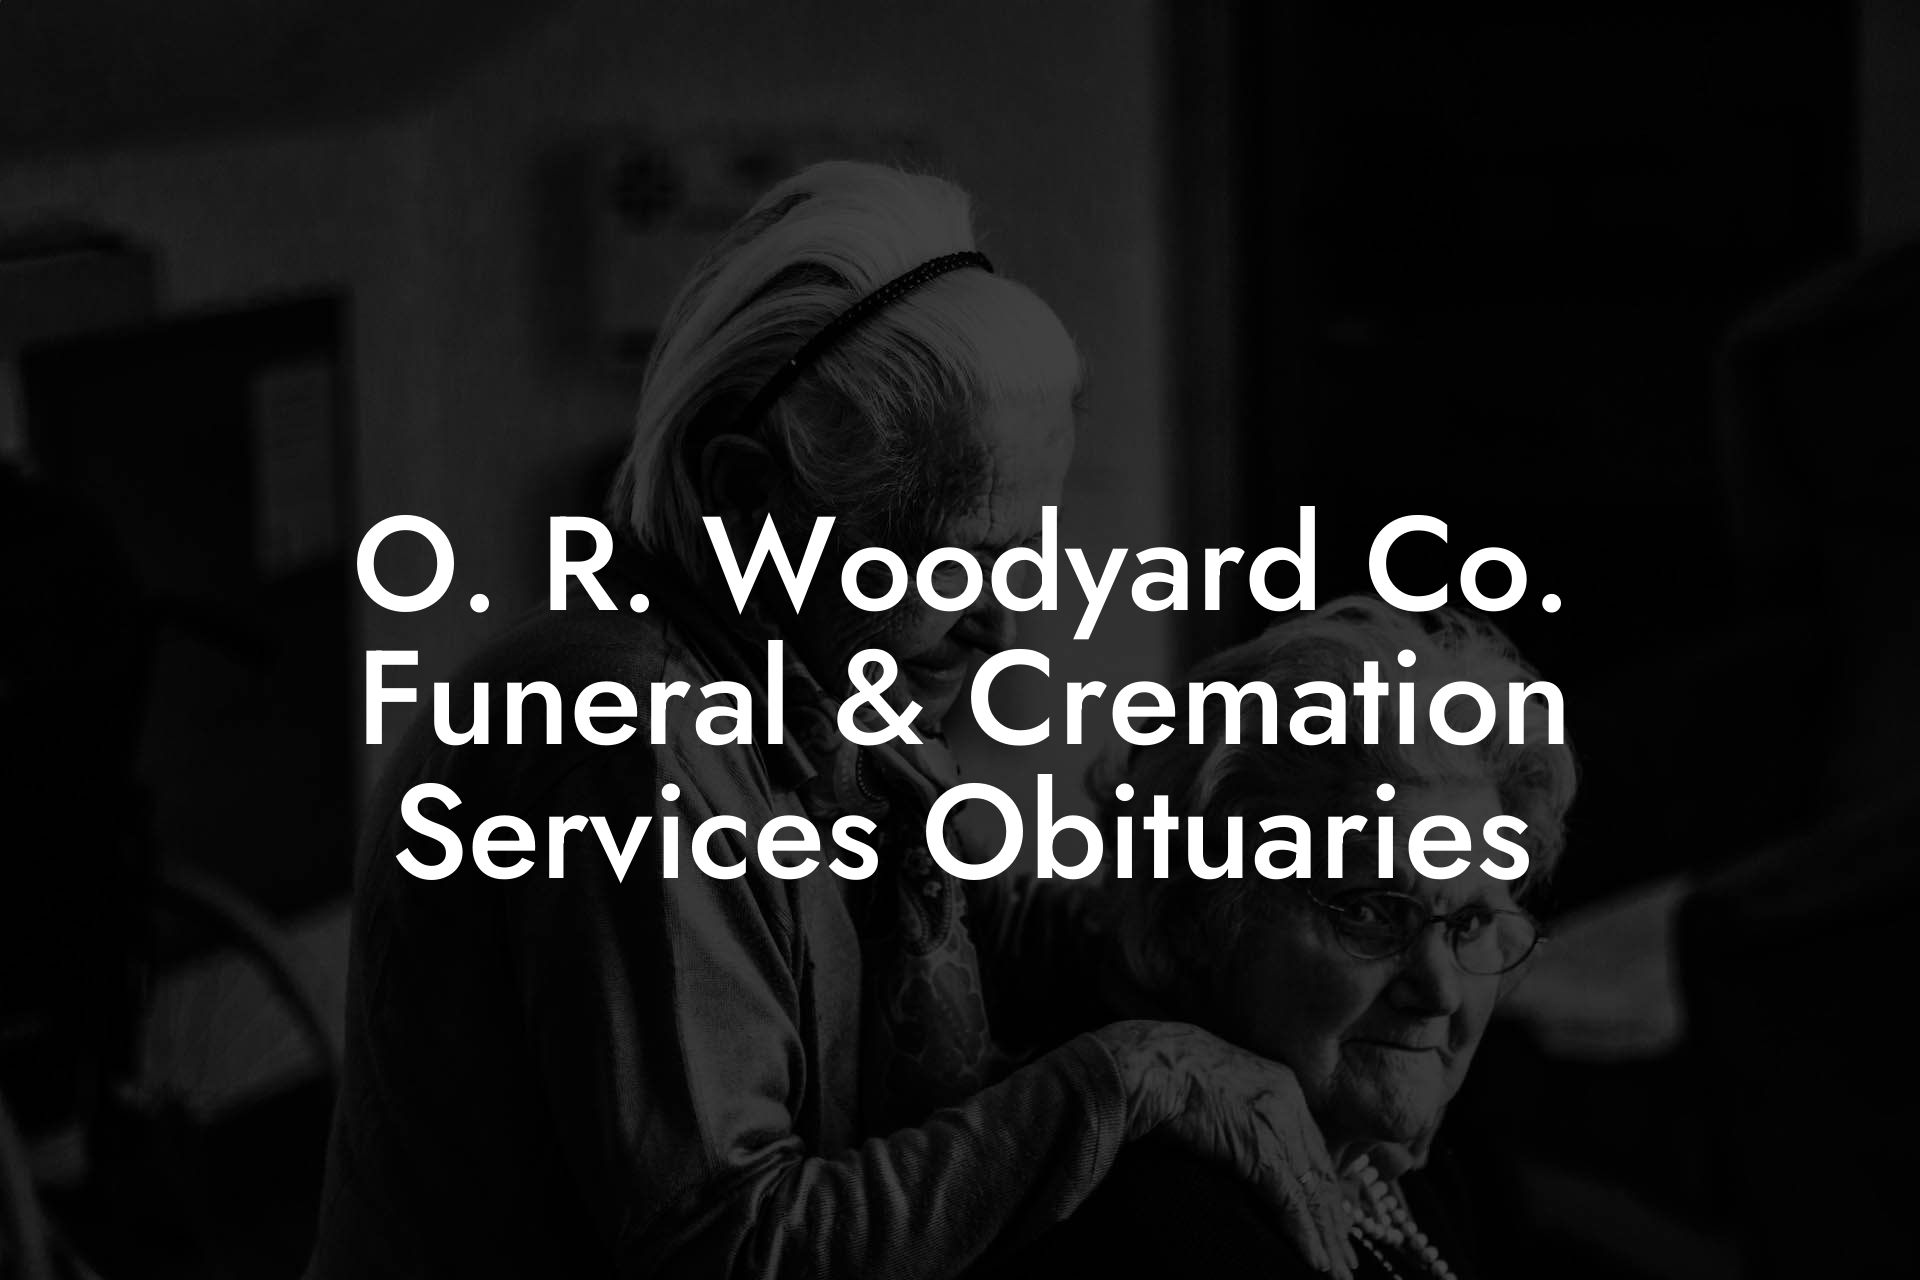 O. R. Woodyard Co. Funeral & Cremation Services Obituaries